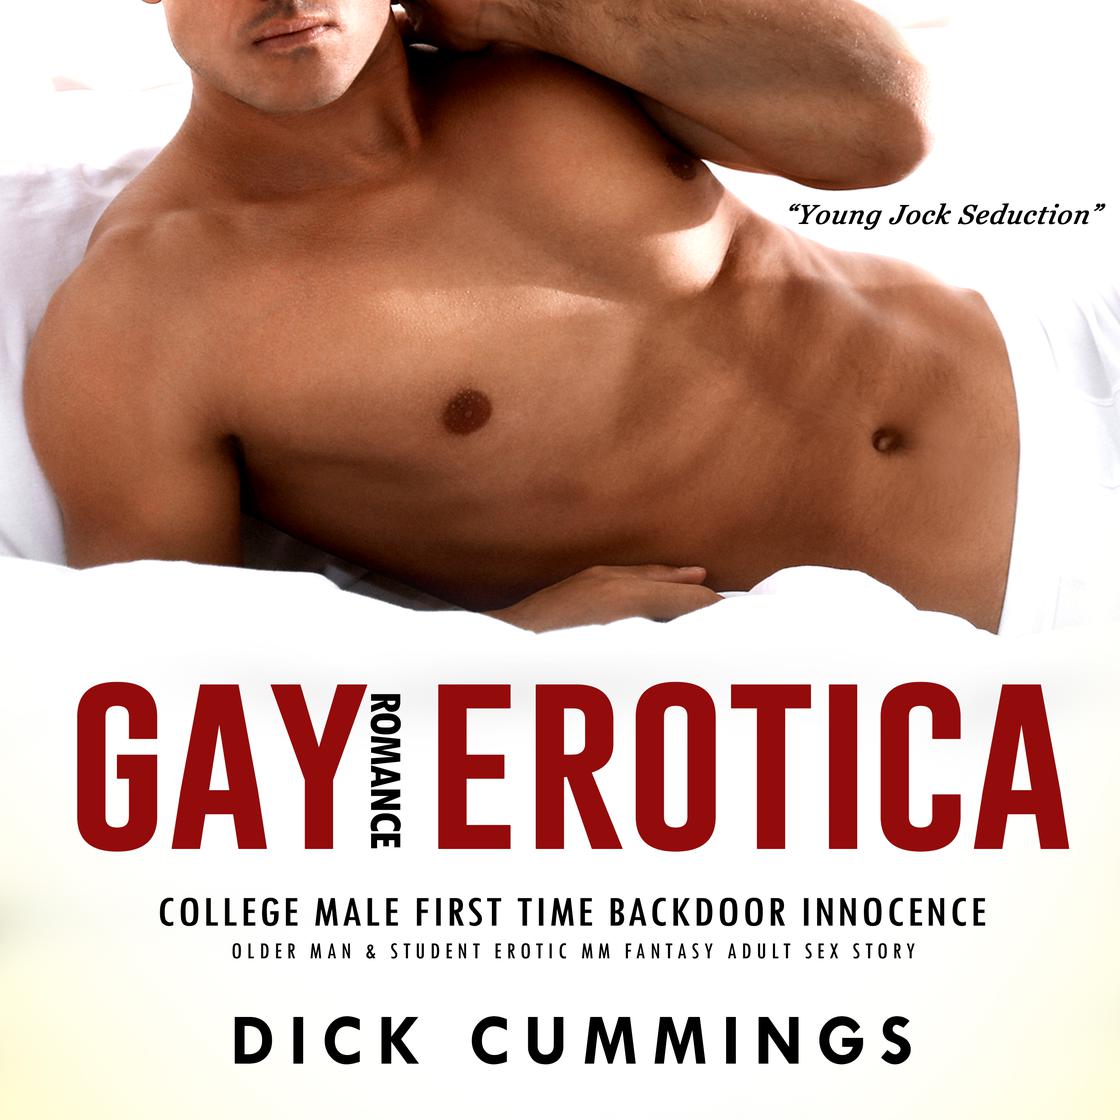 dewan clark recommends young erotic sex stories pic